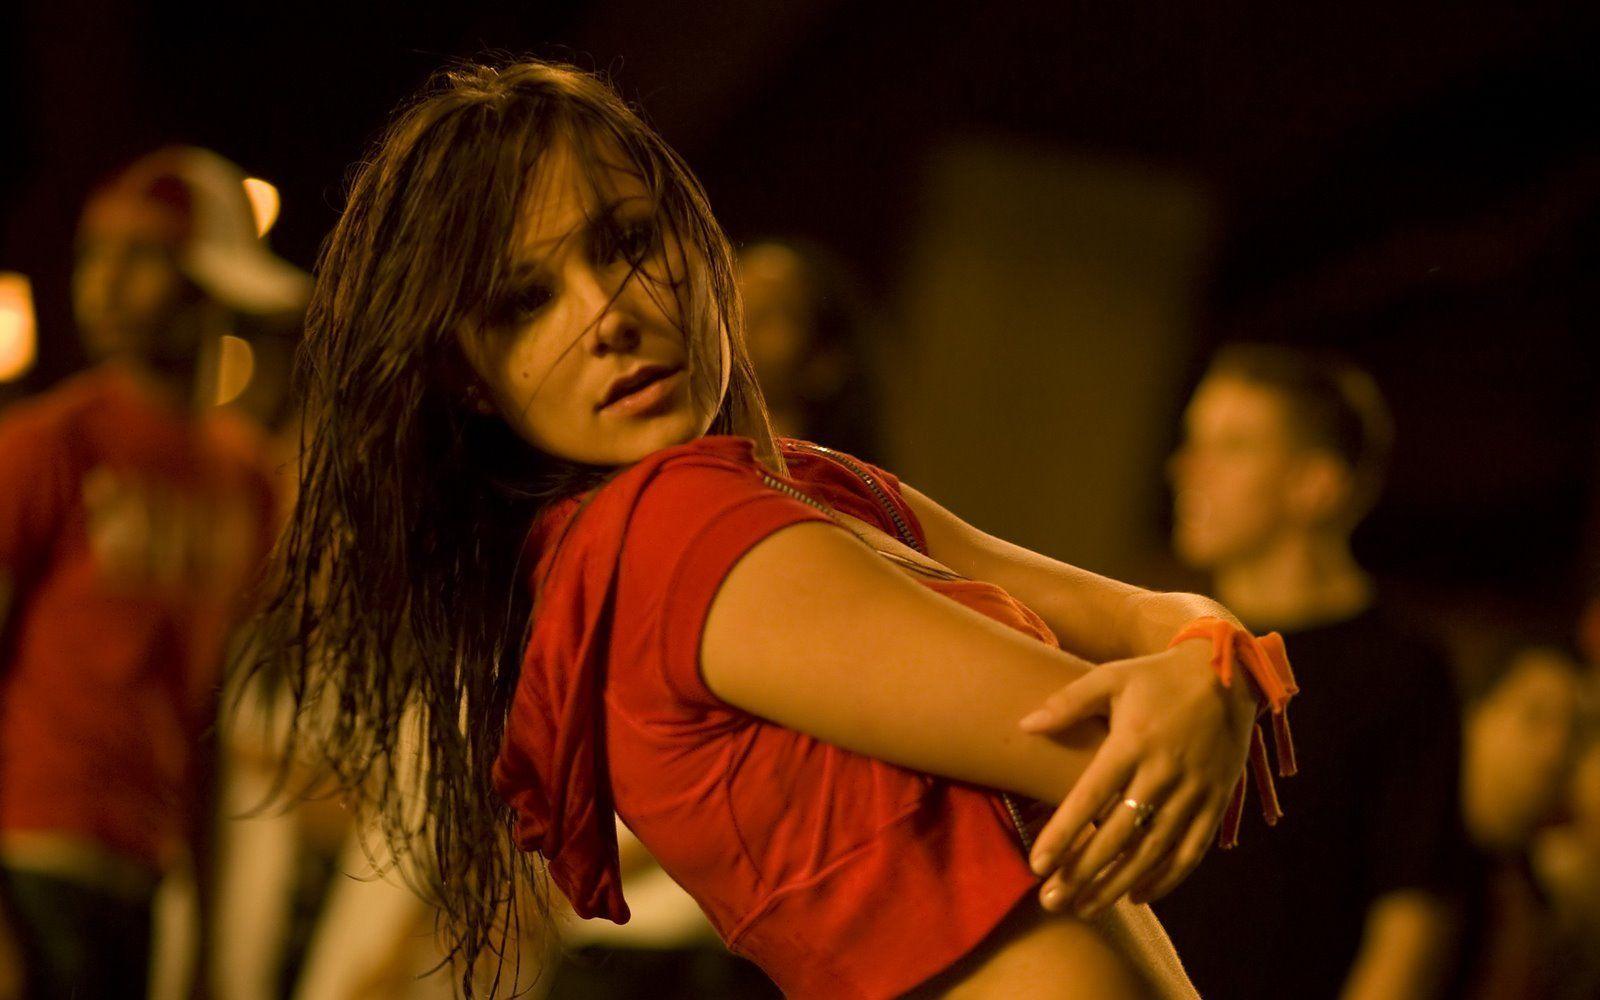 Step Up 2 The Streets image Briana Evigan wallpaper and. All